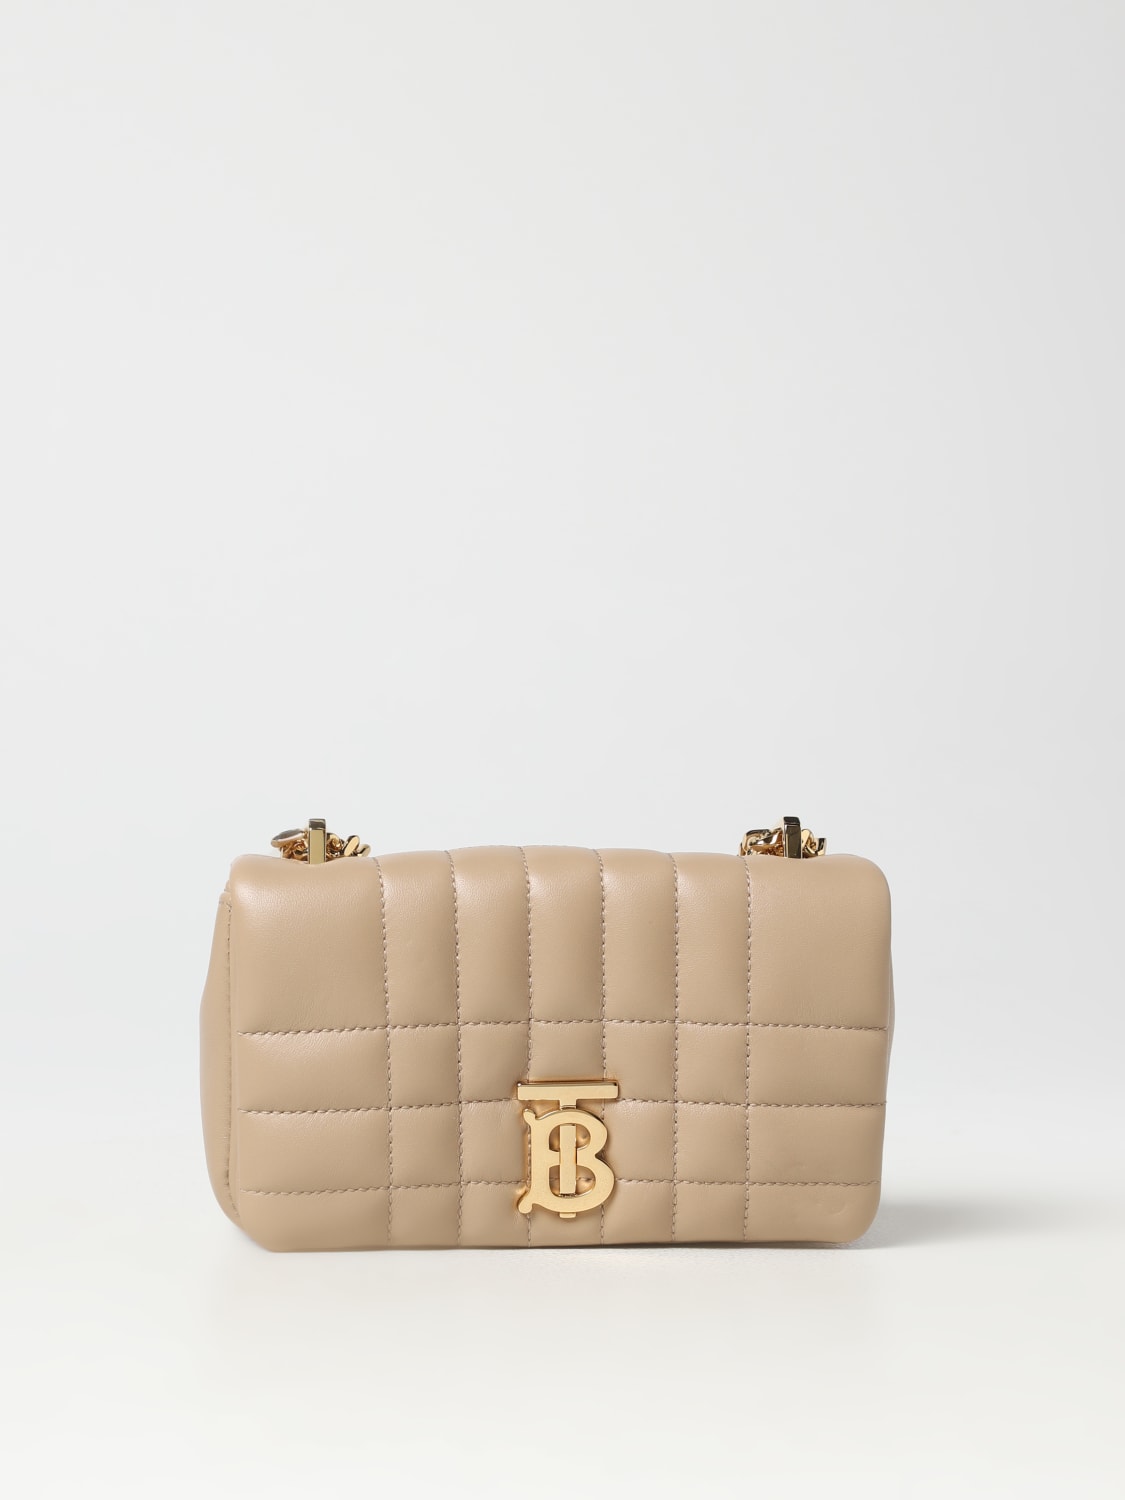 BURBERRY: Lola bag in quilted leather - Beige  Burberry mini bag 8063015  online at